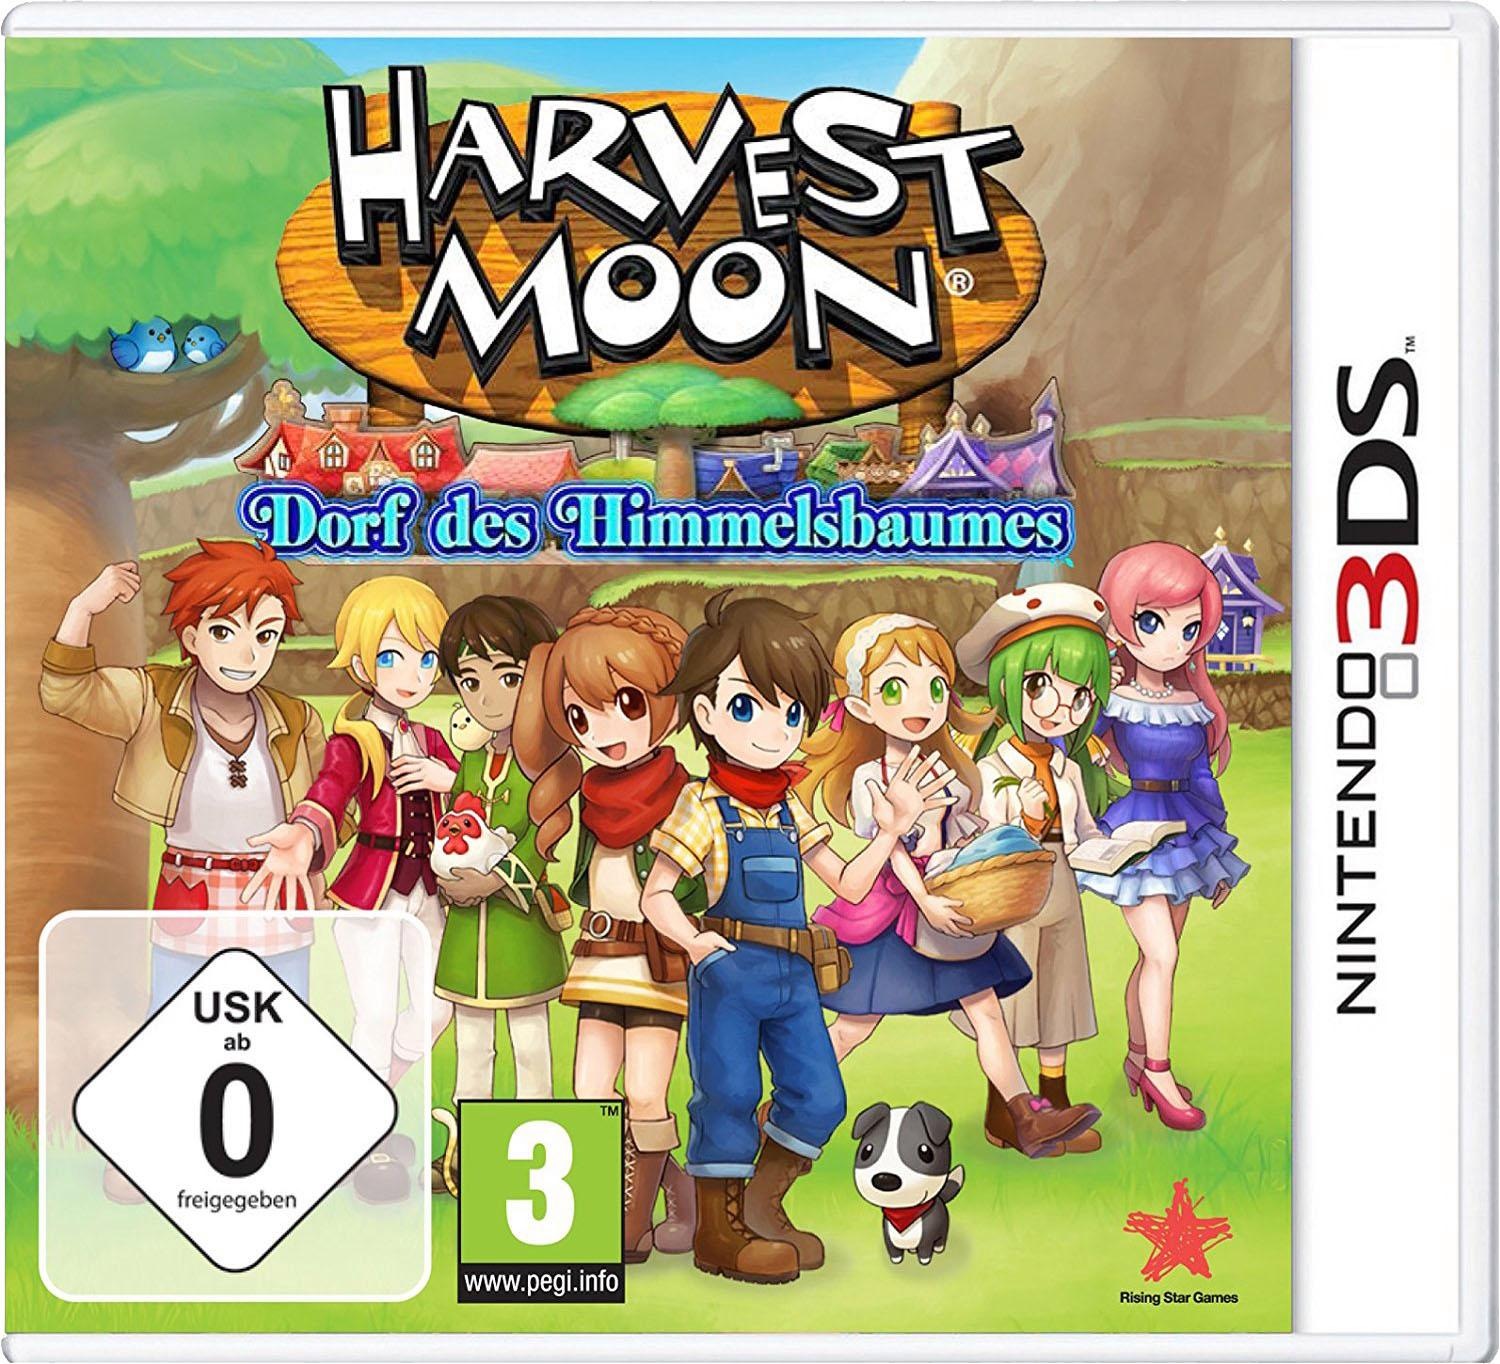 Rising Star Spielesoftware »Harvest Moon: Dorf des Himmelbaumes«, Nintendo 3DS, Software Pyramide